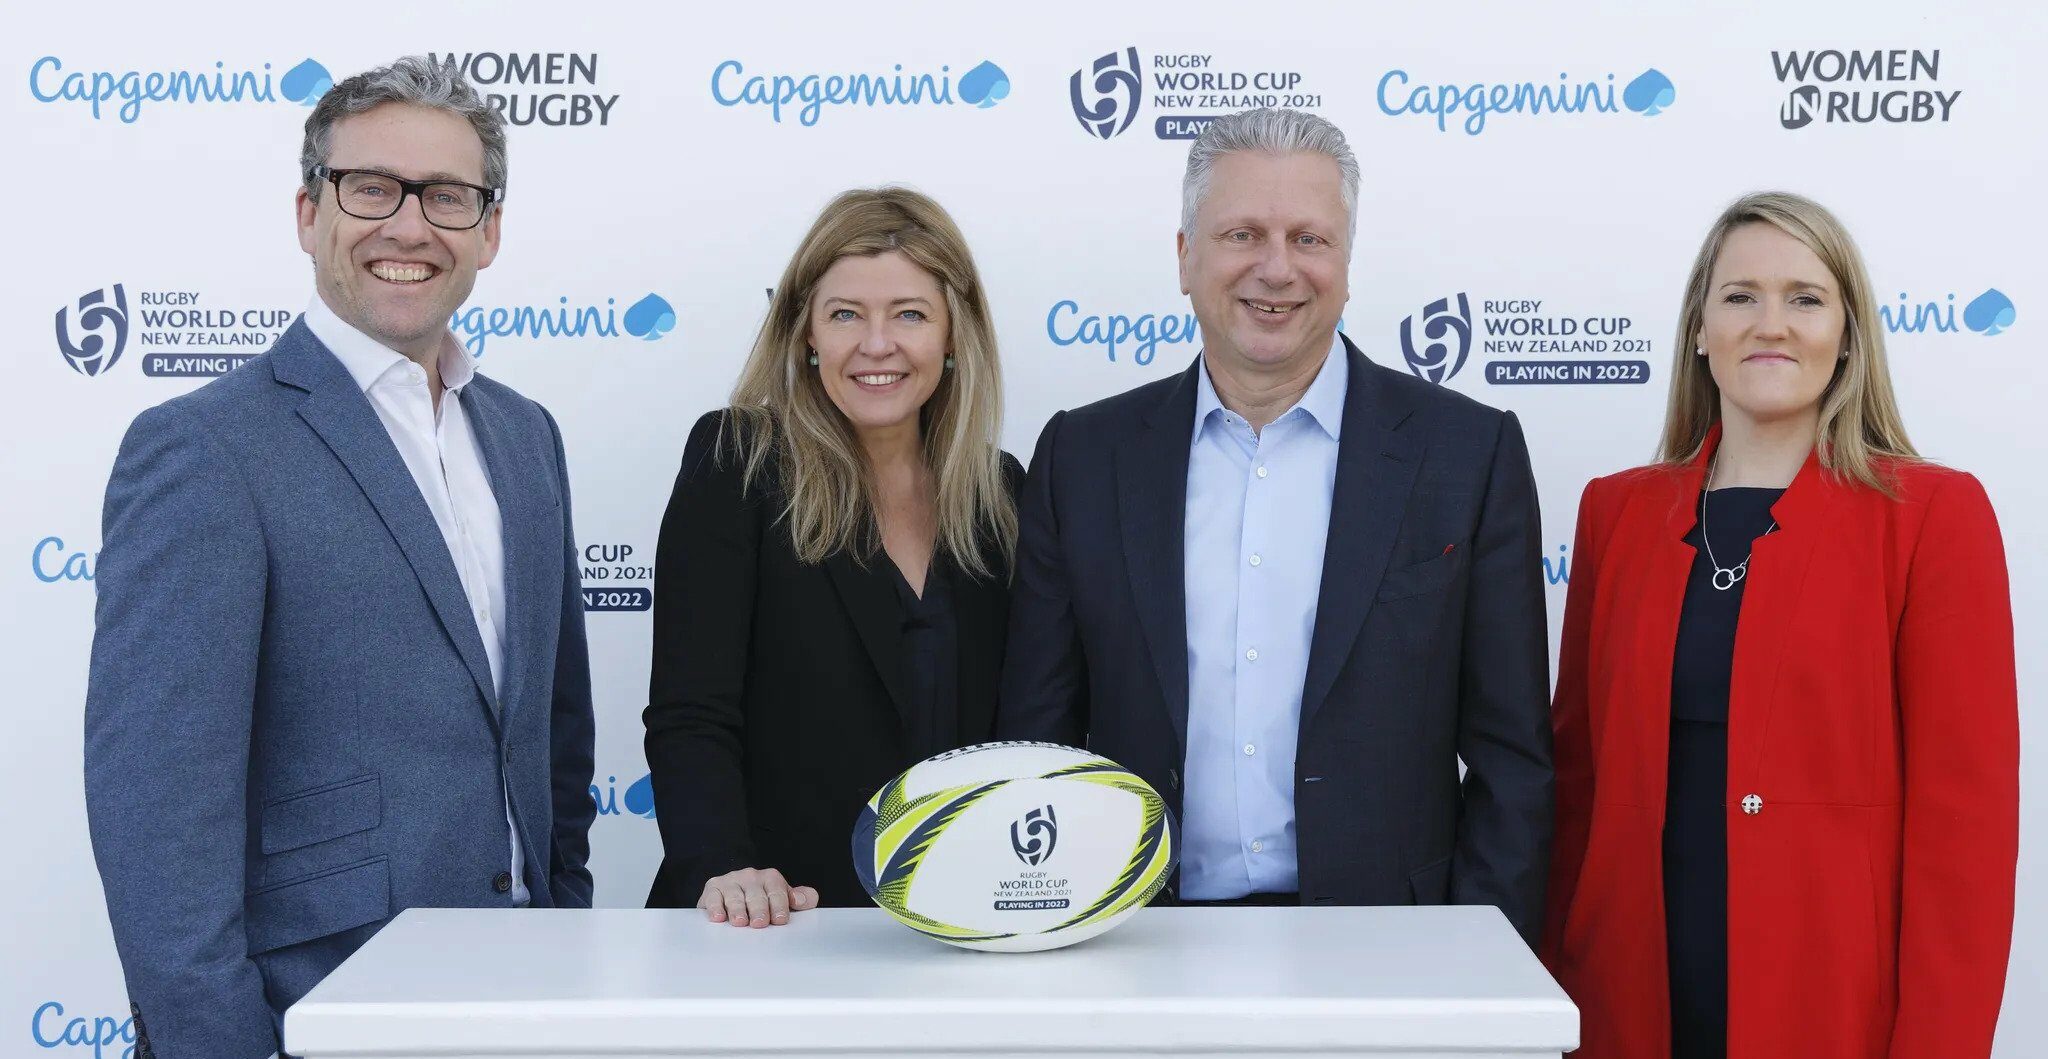 World Rugby Announces Landmark Partnership With Capgemini As Global Partner Of Women In Rugby